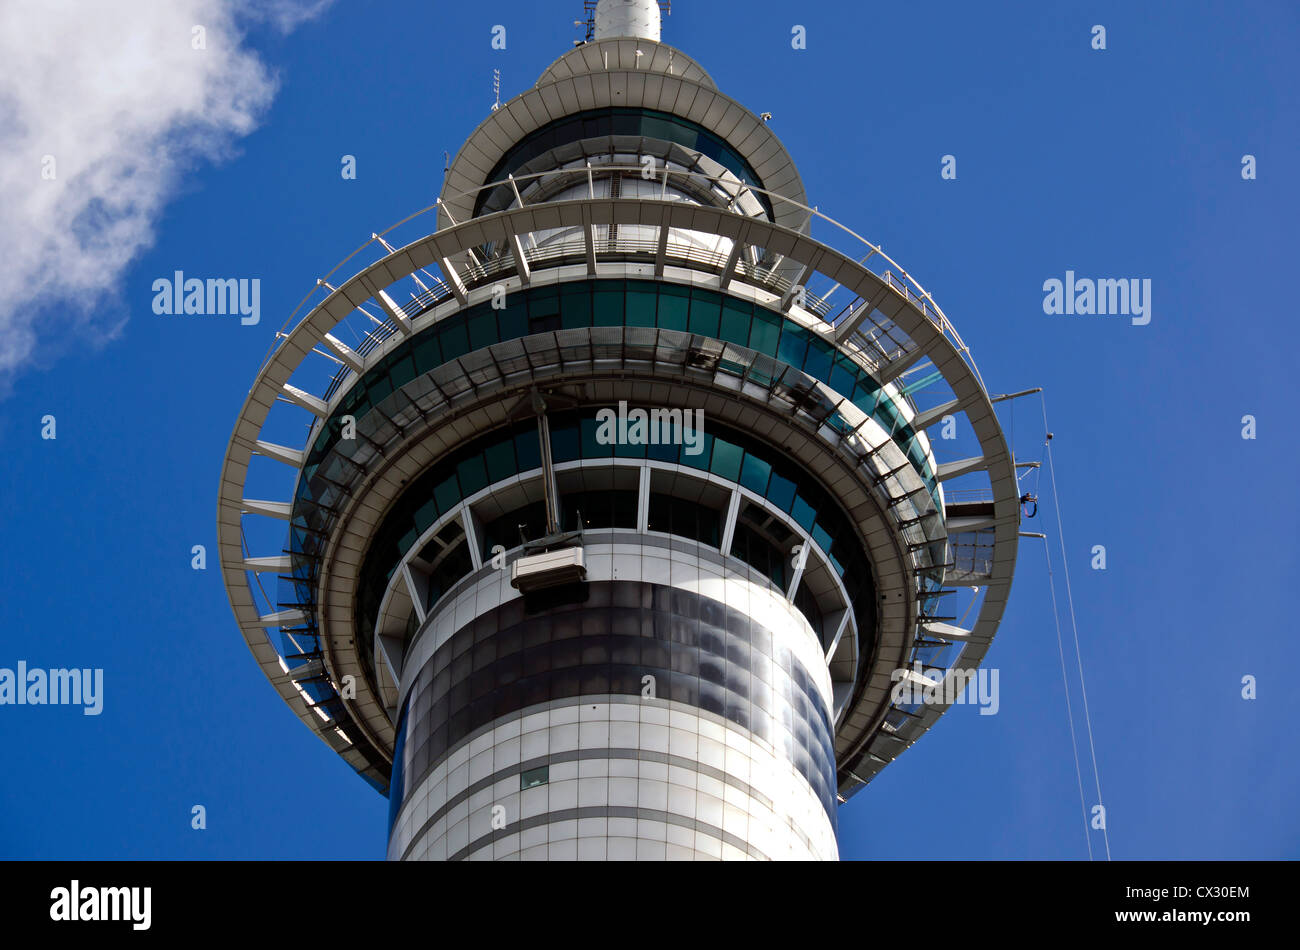 Closeup of the Sky Tower observation platform and space needle looking up, Auckland New Zealand skyline. Stock Photo